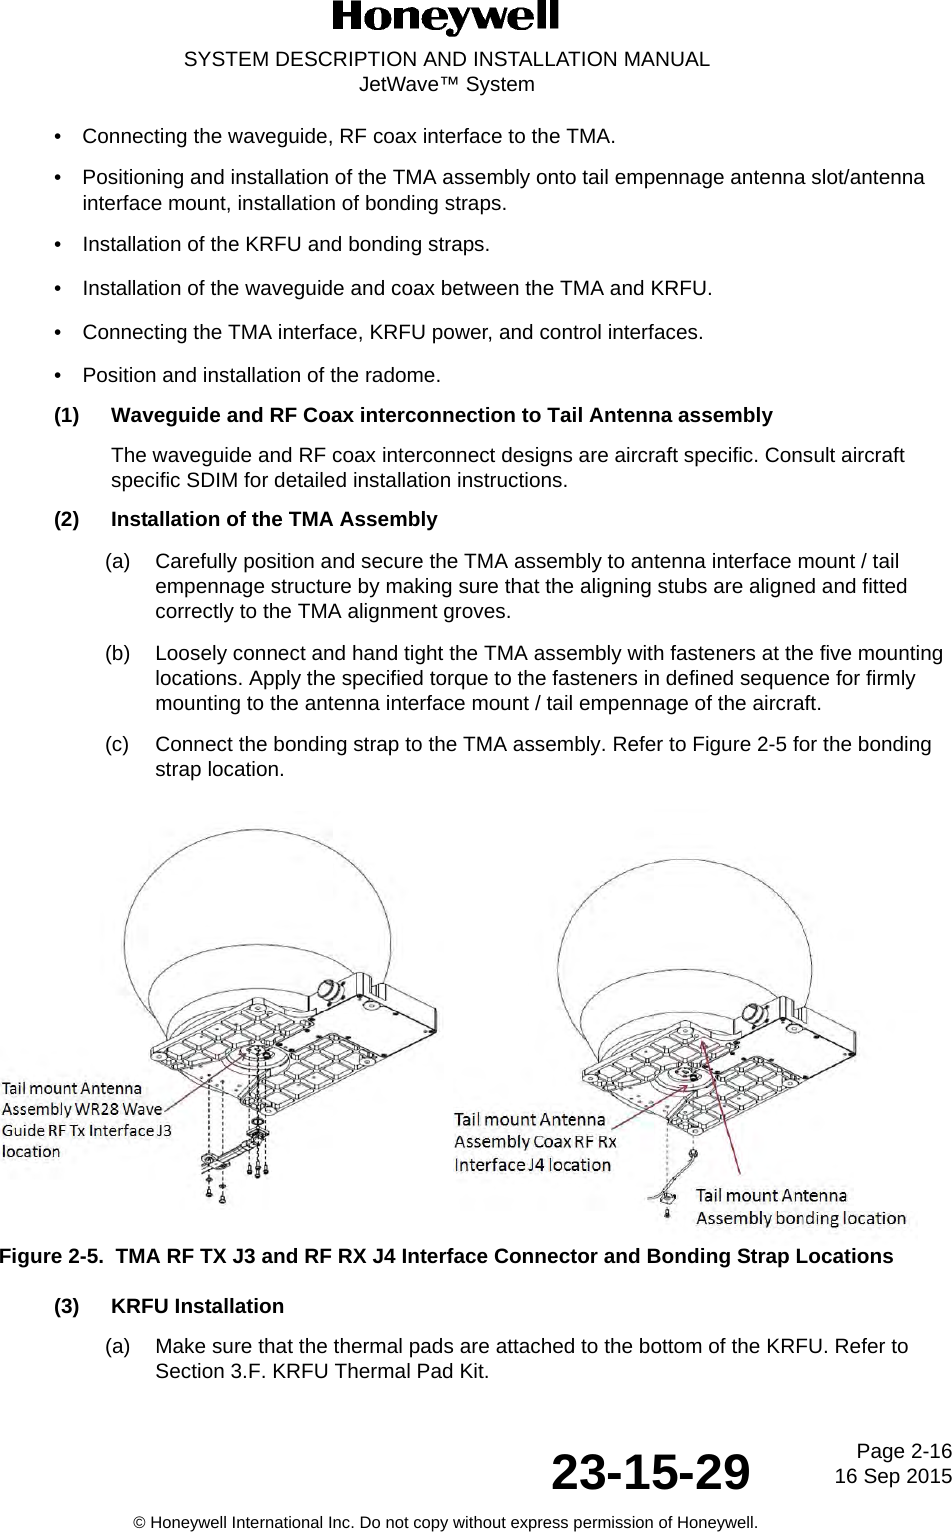 Page 2-16 16 Sep 201523-15-29SYSTEM DESCRIPTION AND INSTALLATION MANUALJetWave™ System© Honeywell International Inc. Do not copy without express permission of Honeywell.• Connecting the waveguide, RF coax interface to the TMA. • Positioning and installation of the TMA assembly onto tail empennage antenna slot/antenna interface mount, installation of bonding straps. • Installation of the KRFU and bonding straps. • Installation of the waveguide and coax between the TMA and KRFU. • Connecting the TMA interface, KRFU power, and control interfaces. • Position and installation of the radome. (1) Waveguide and RF Coax interconnection to Tail Antenna assembly The waveguide and RF coax interconnect designs are aircraft specific. Consult aircraft specific SDIM for detailed installation instructions. (2) Installation of the TMA Assembly(a) Carefully position and secure the TMA assembly to antenna interface mount / tail empennage structure by making sure that the aligning stubs are aligned and fitted correctly to the TMA alignment groves. (b) Loosely connect and hand tight the TMA assembly with fasteners at the five mounting locations. Apply the specified torque to the fasteners in defined sequence for firmly mounting to the antenna interface mount / tail empennage of the aircraft. (c) Connect the bonding strap to the TMA assembly. Refer to Figure 2-5 for the bonding strap location. Figure 2-5.  TMA RF TX J3 and RF RX J4 Interface Connector and Bonding Strap Locations(3) KRFU Installation (a) Make sure that the thermal pads are attached to the bottom of the KRFU. Refer to Section 3.F. KRFU Thermal Pad Kit.